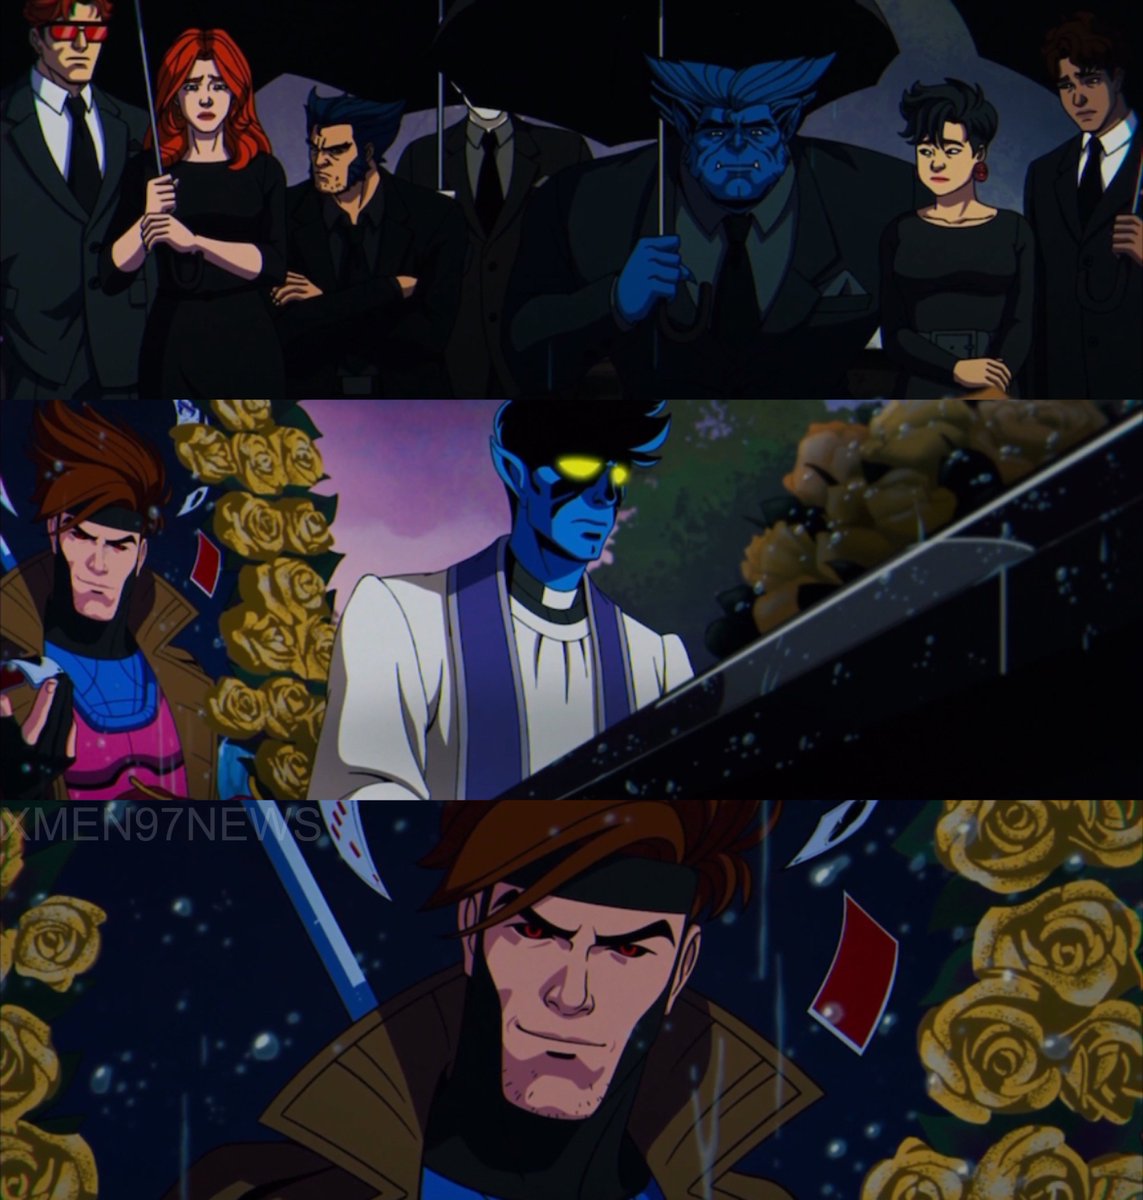 #XMen97 — 'Every gambler has a tell. Modesty was Gambit’s.' – Nightcrawler 💔

I can’t take this… 😭😭😭